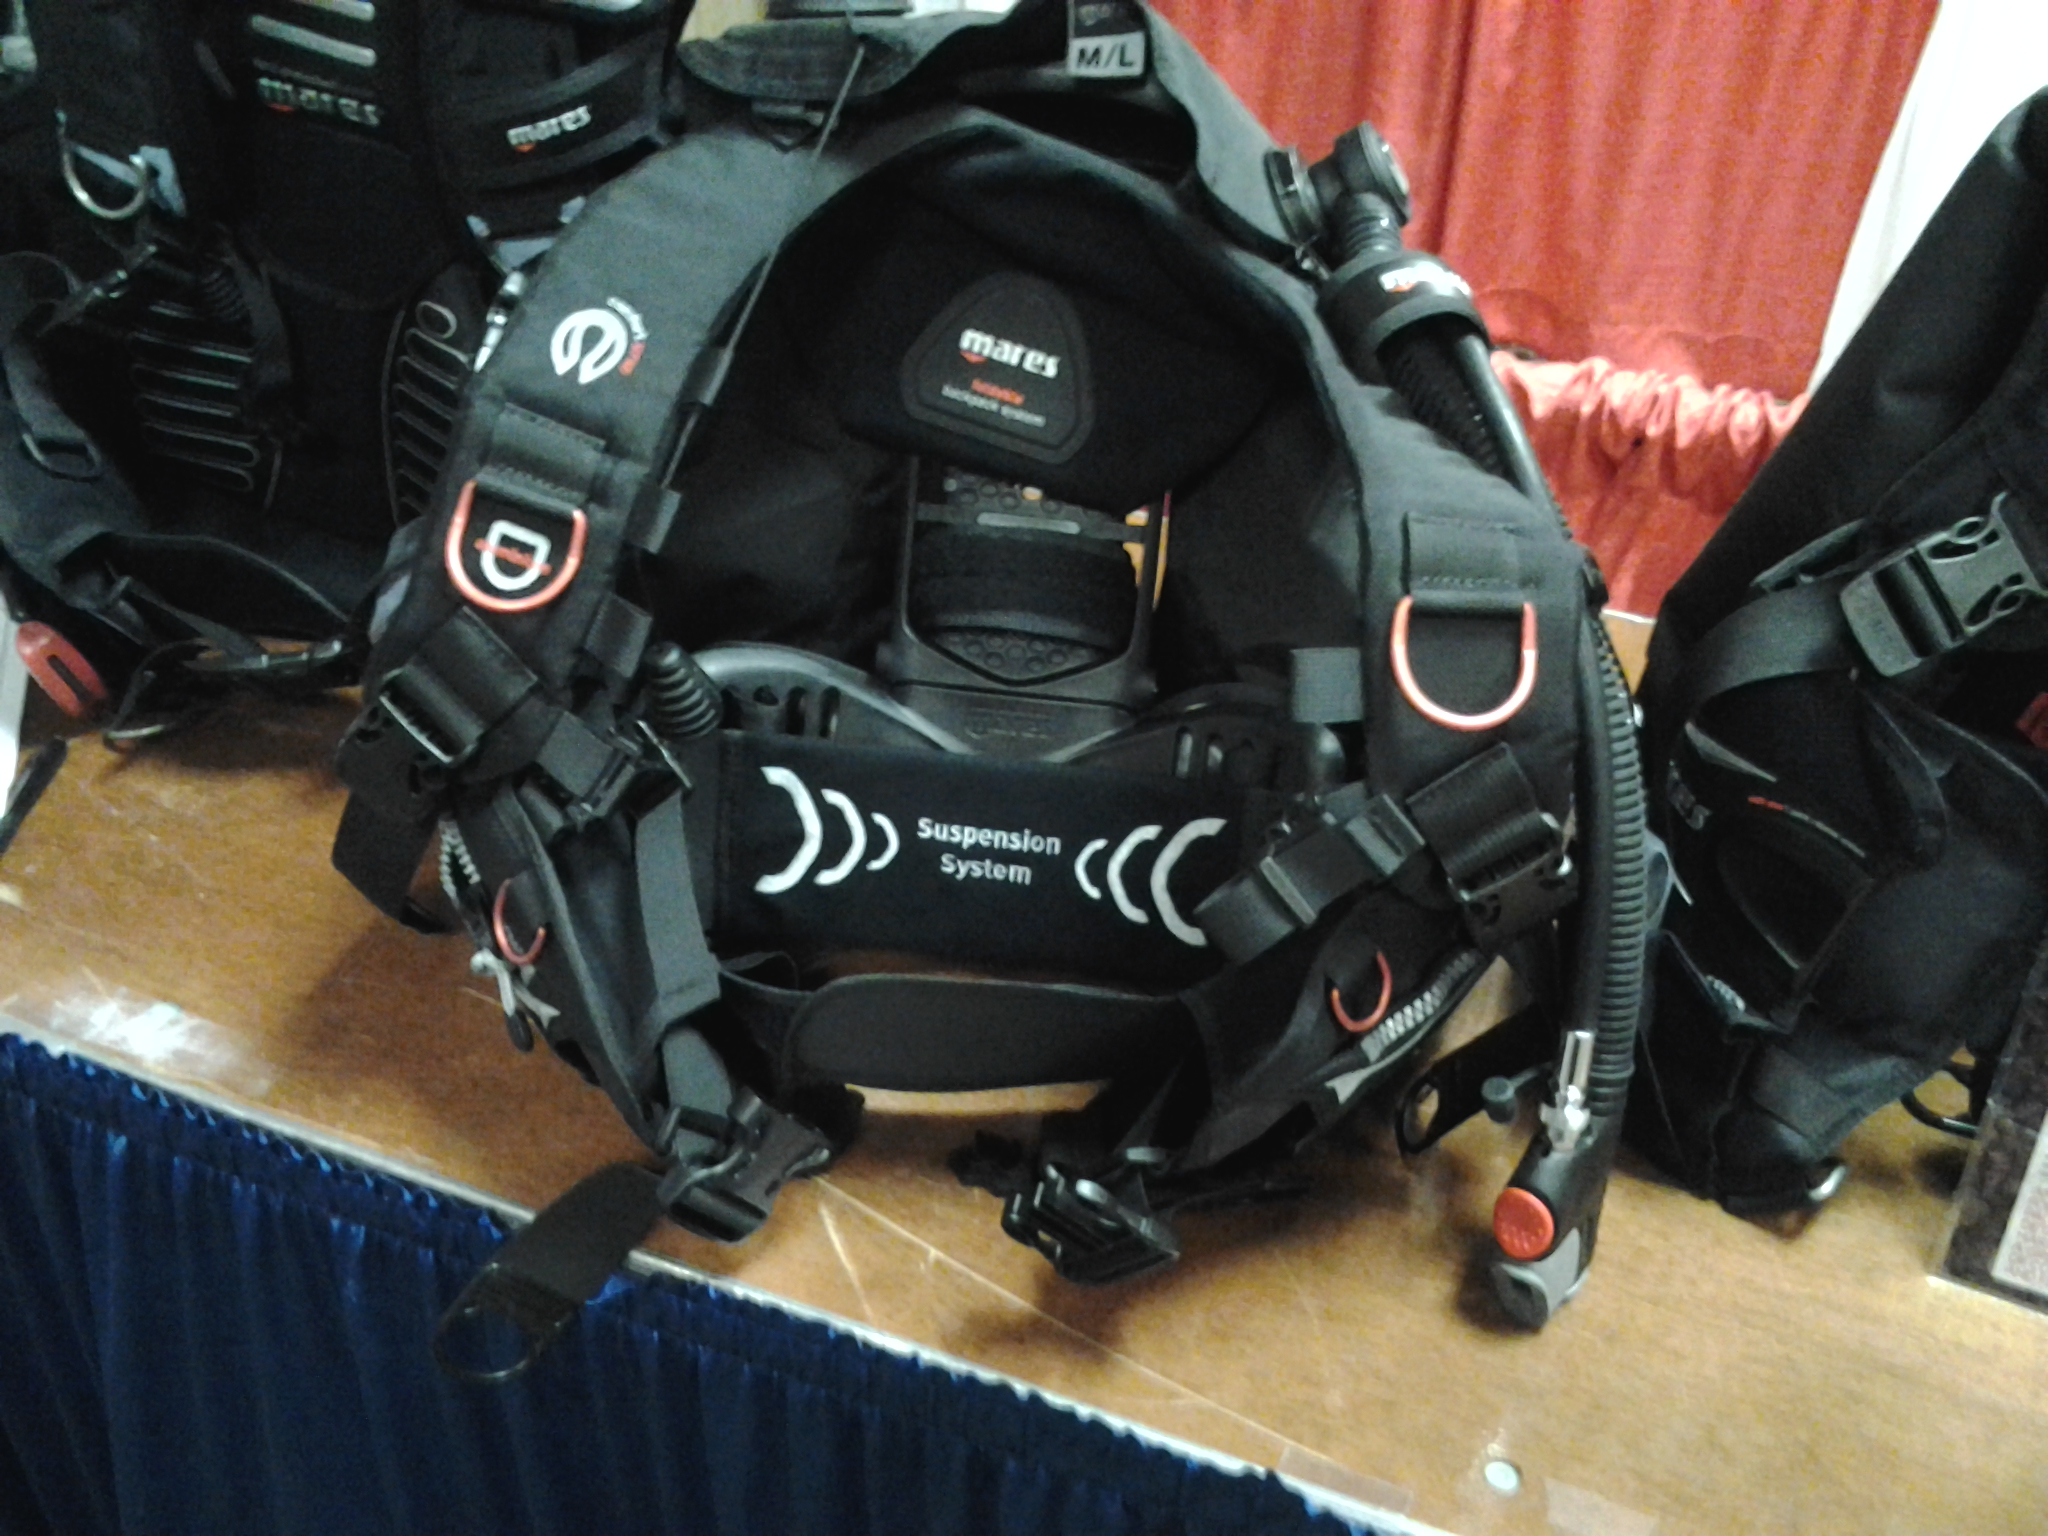 Mares new suspension system @ Baltimore Dive Show